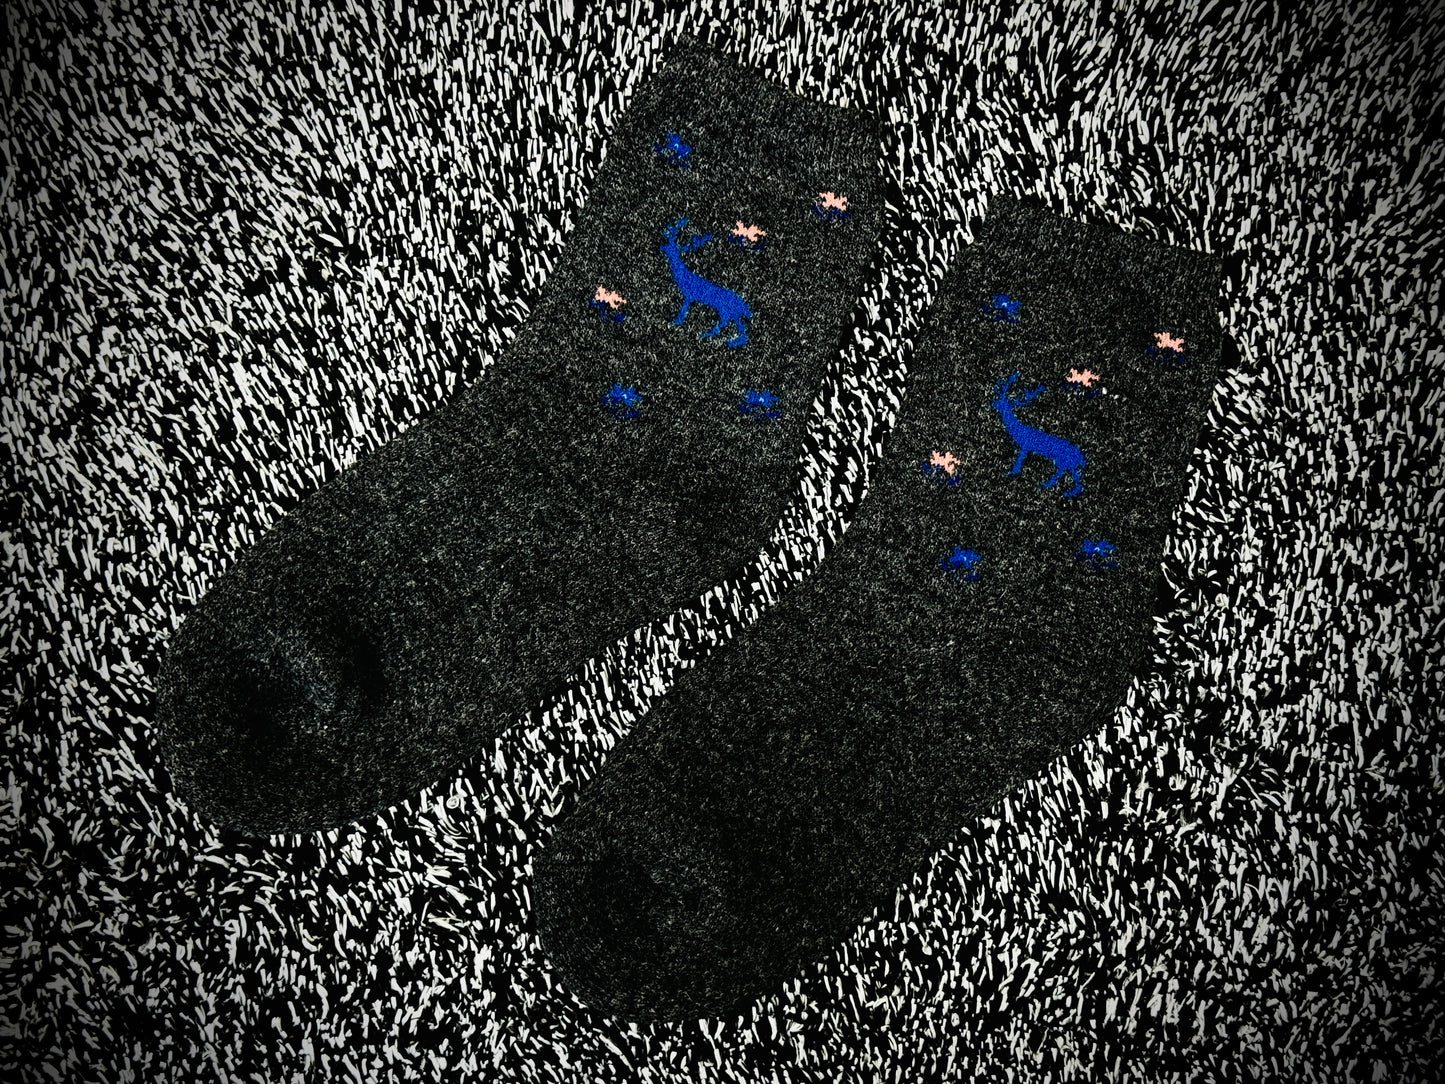 Imported Wool Socks | 3 pieces set